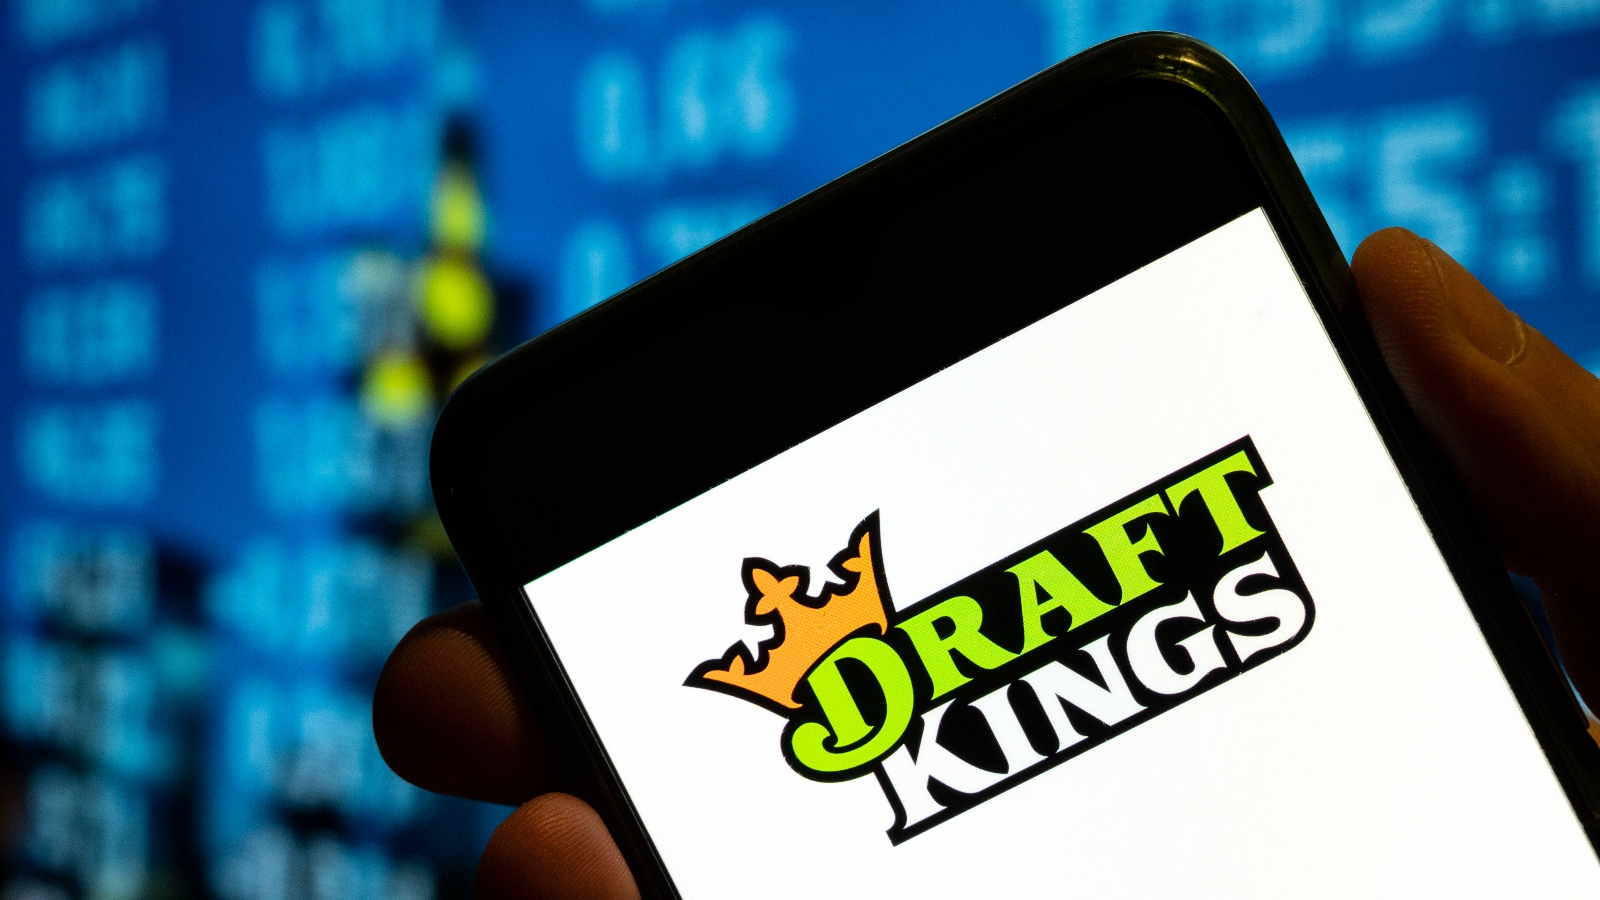 DraftKings sportsbook logo on the iPhone